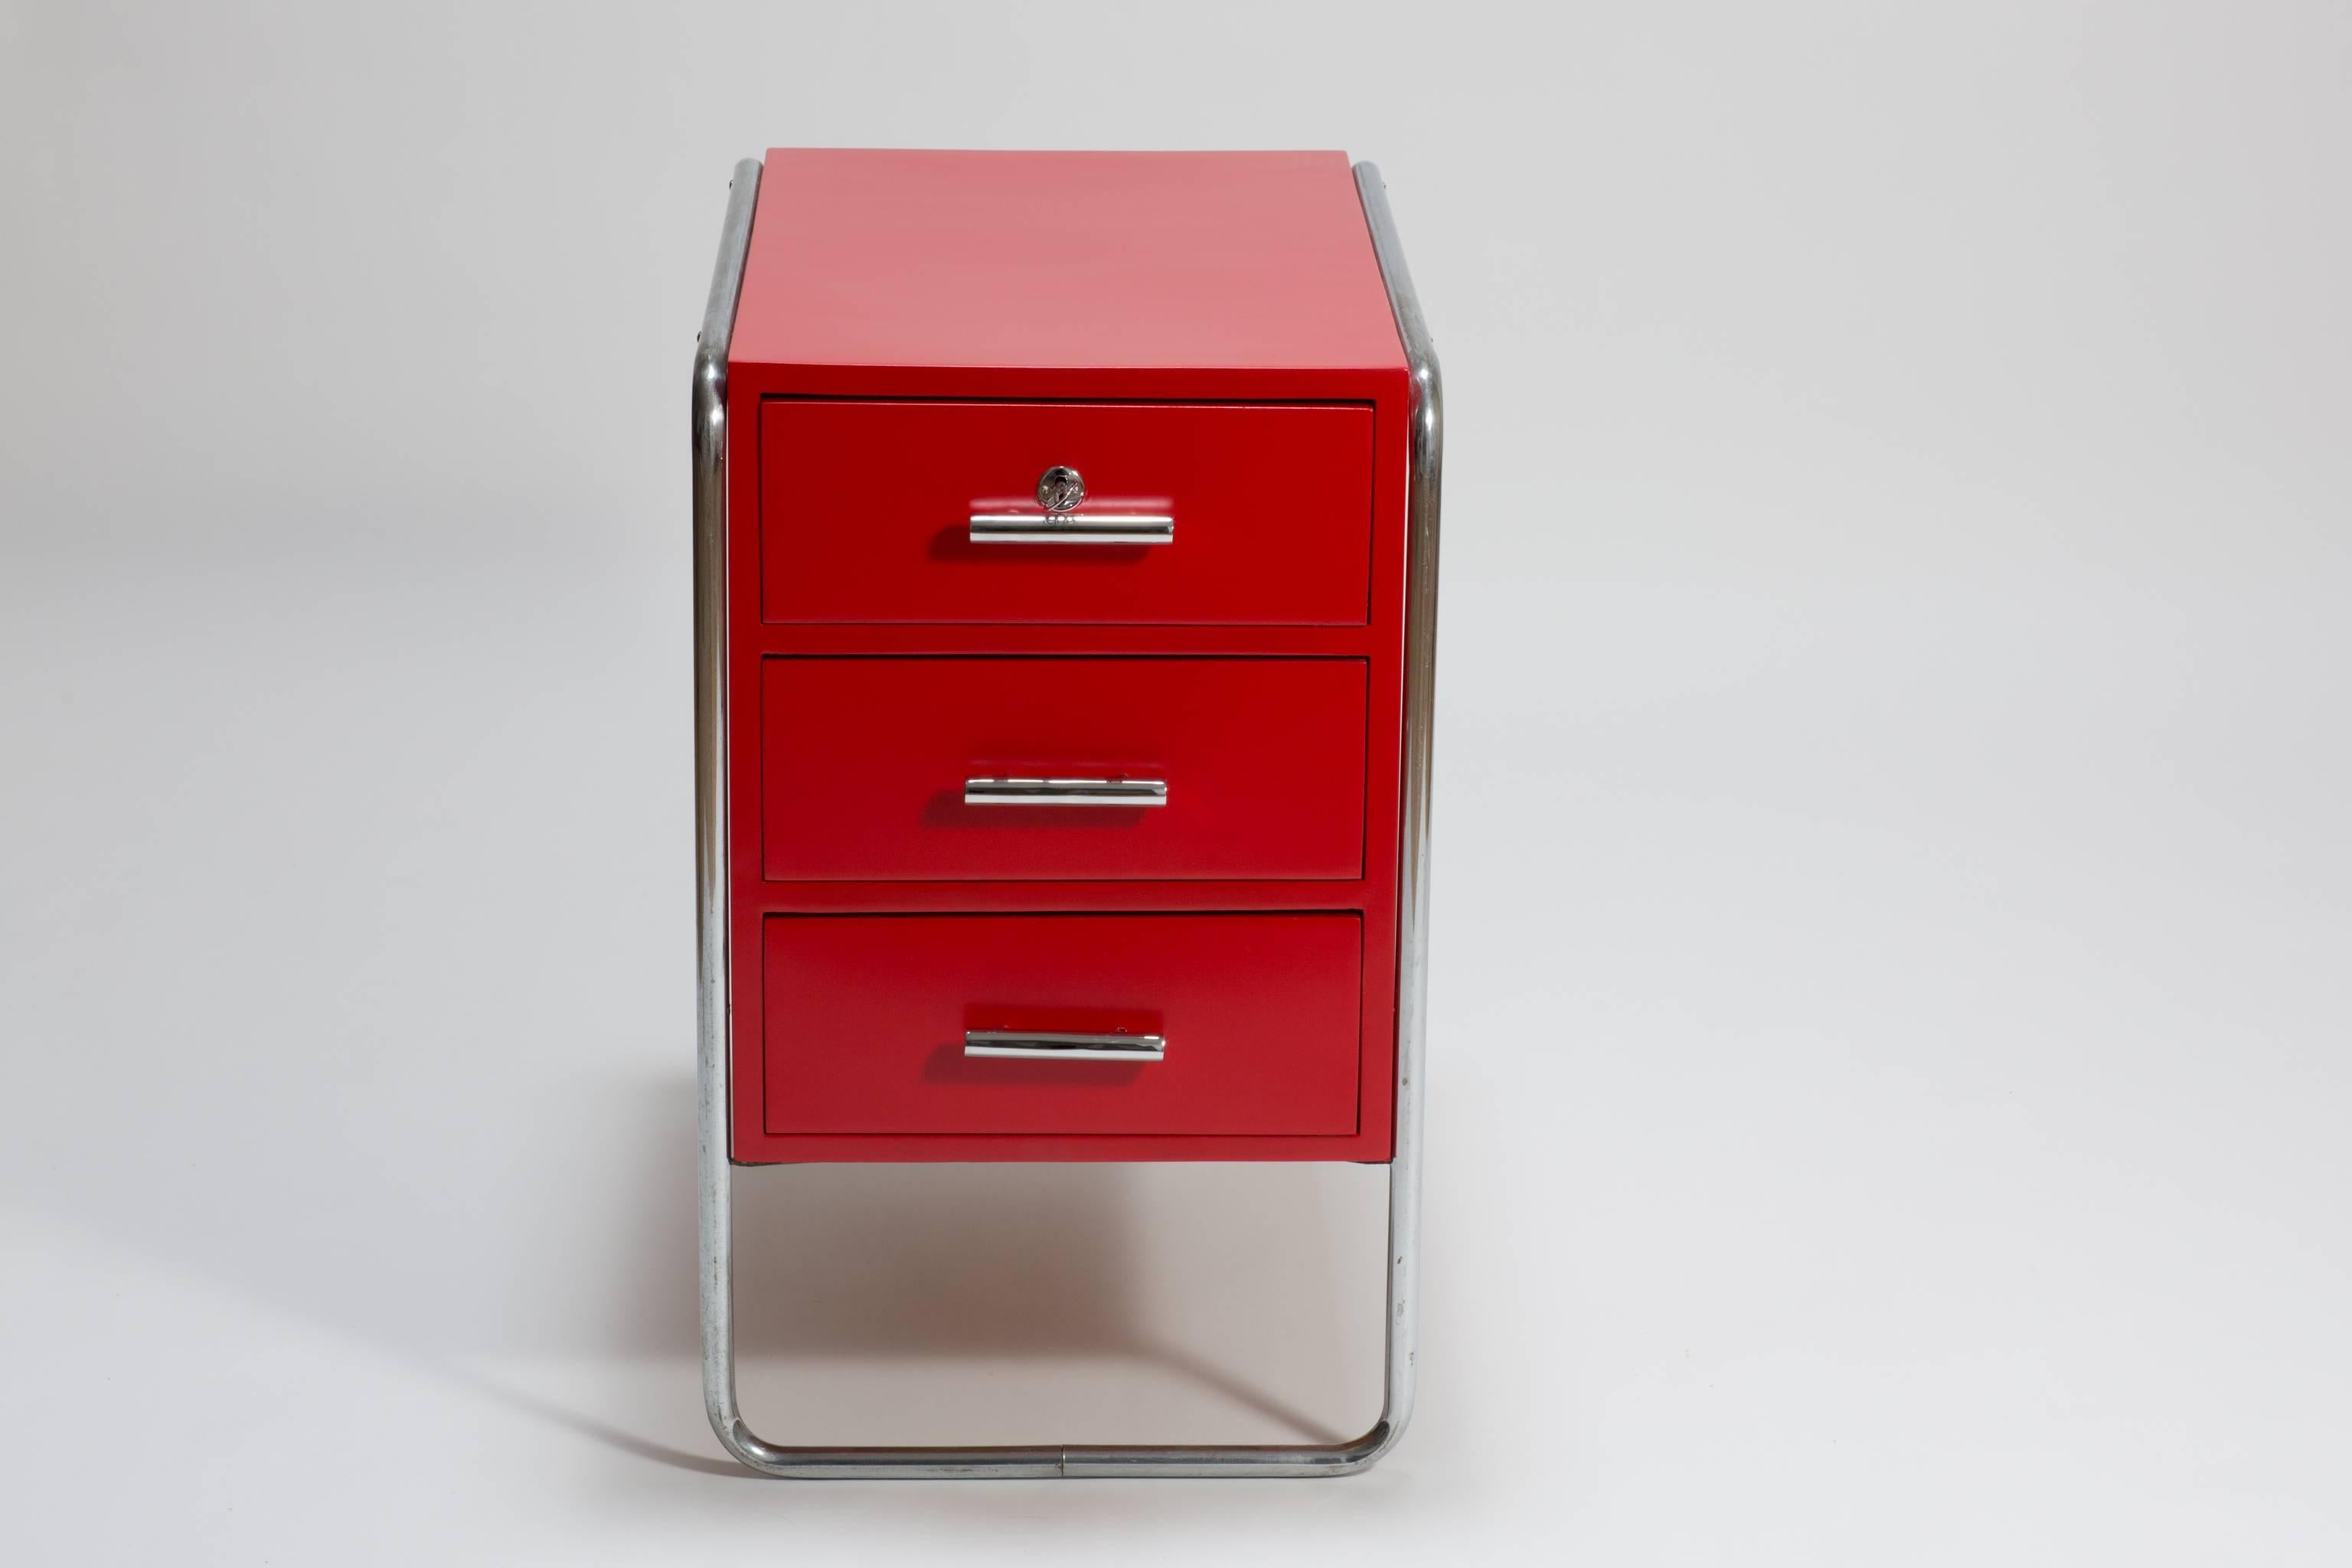 Original red midcentury Bauhaus writing desk container designed by Marcel Breuer, circa 1930. The container was produced by Muecke & Melder around 1930 and has a makers mark at the back. The container has three drawers with original locks and keys